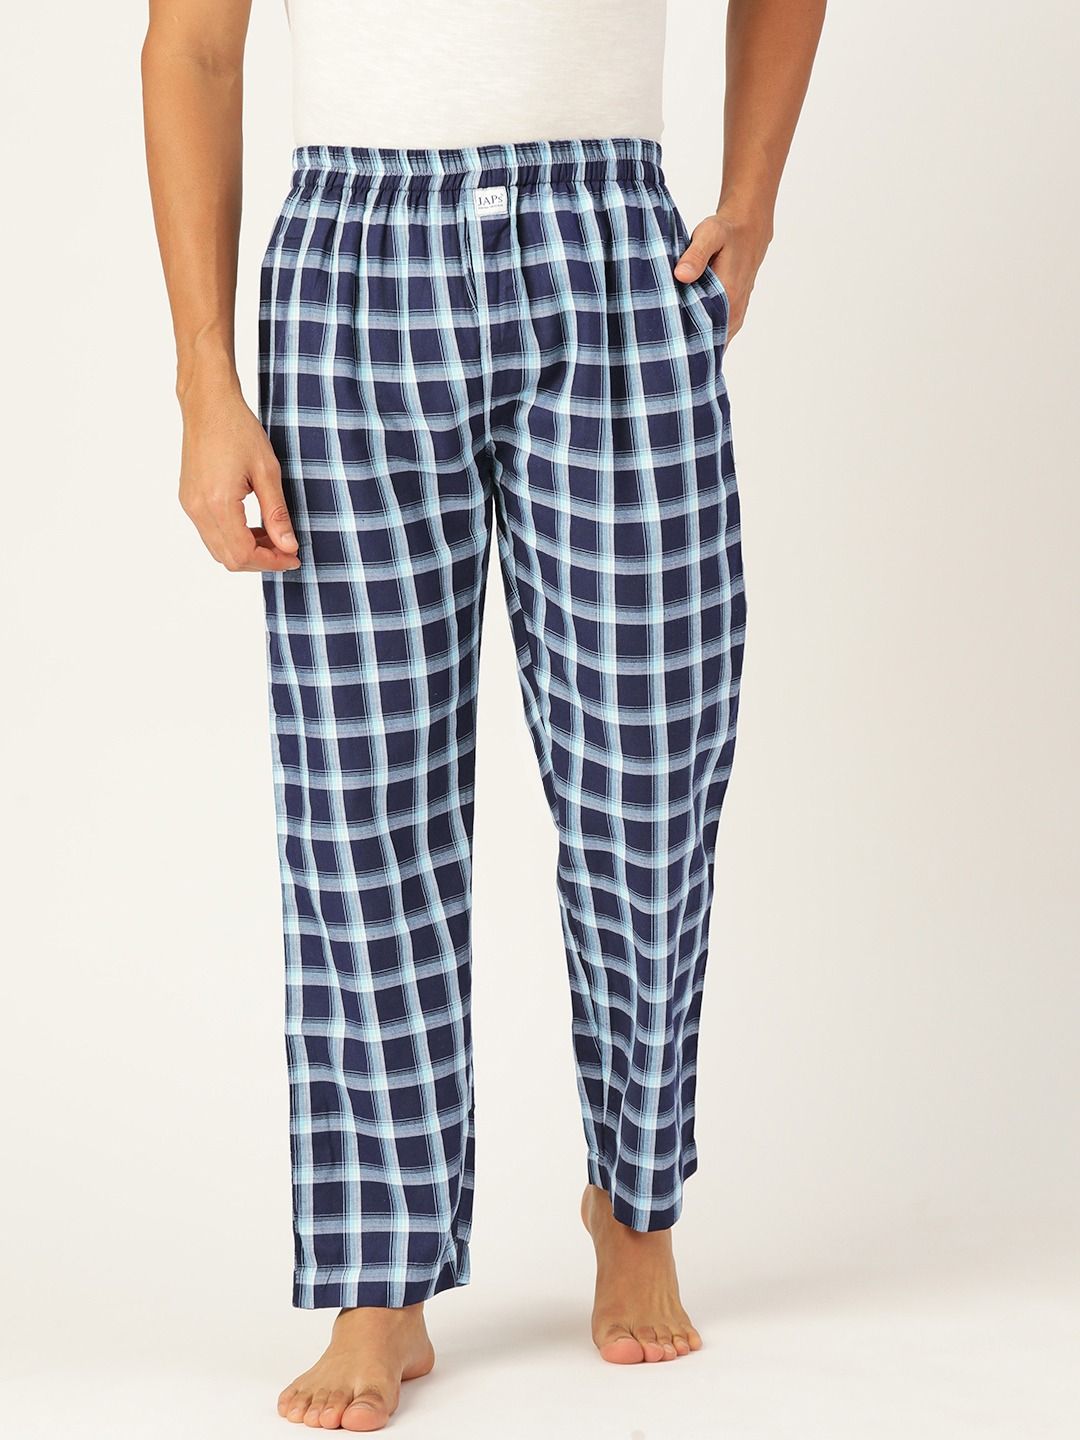 Navy Blue Checked Premium Cotton Lounge Pant Pajama Online In India  SizeShirt M Color Navy